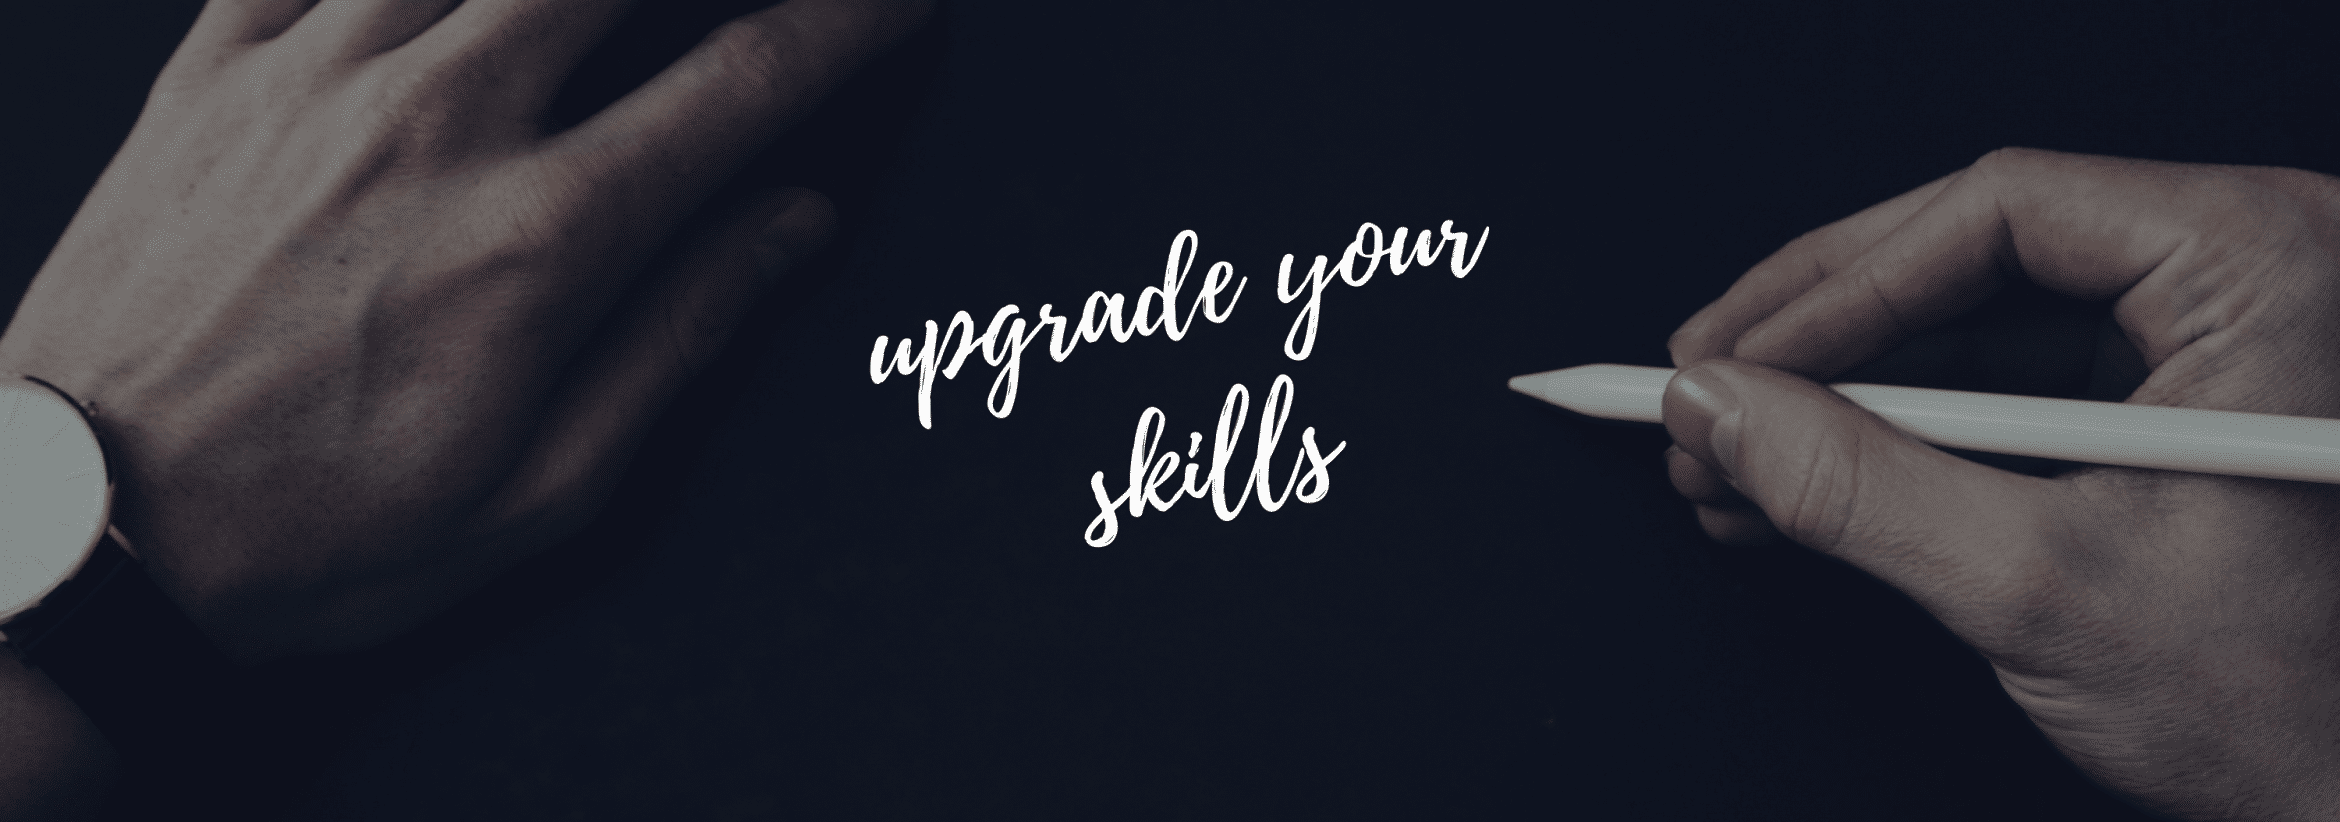 upgrade your skills.png